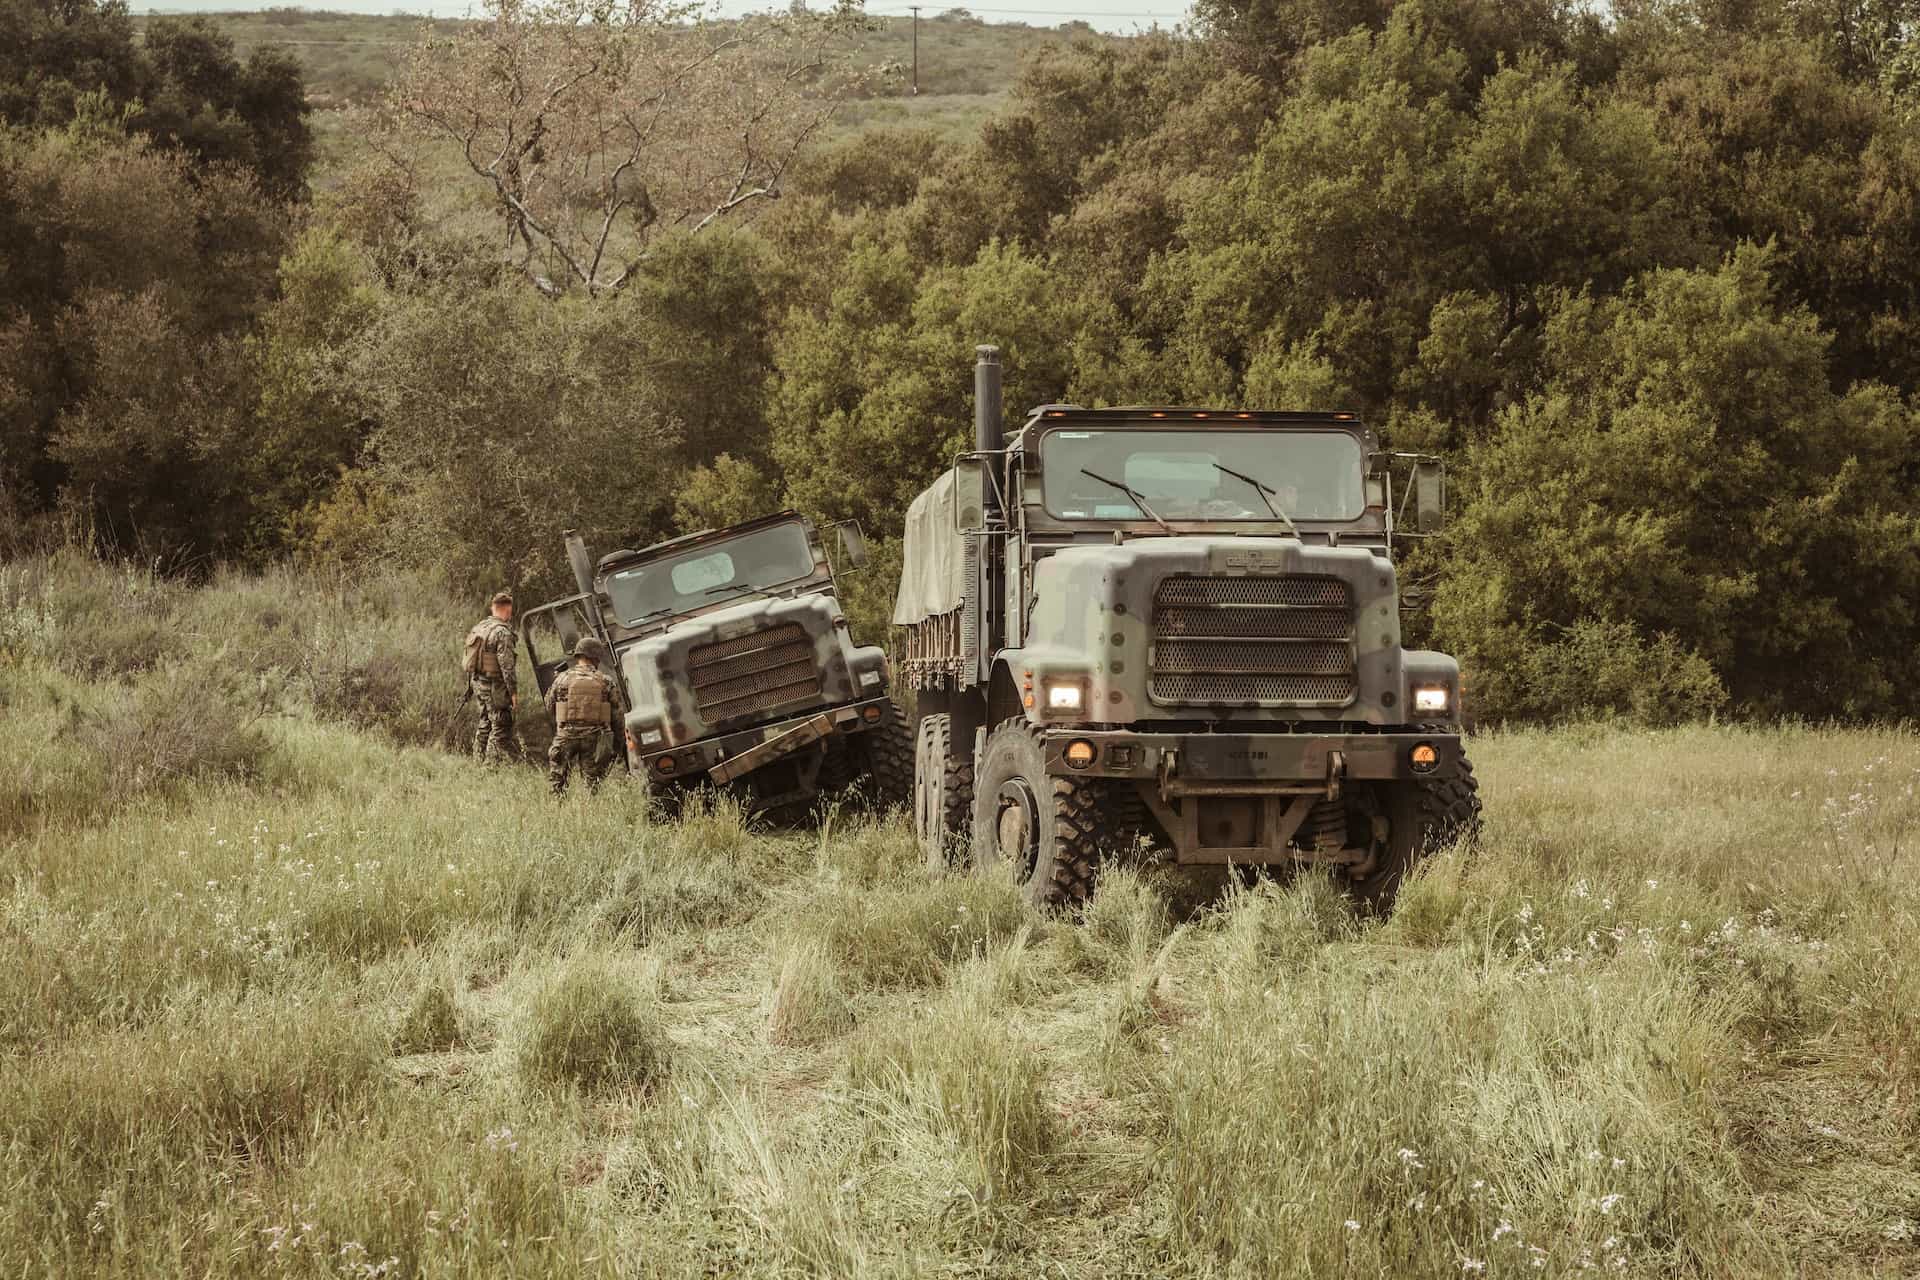 A convoy of military vehicles drives through a green area.